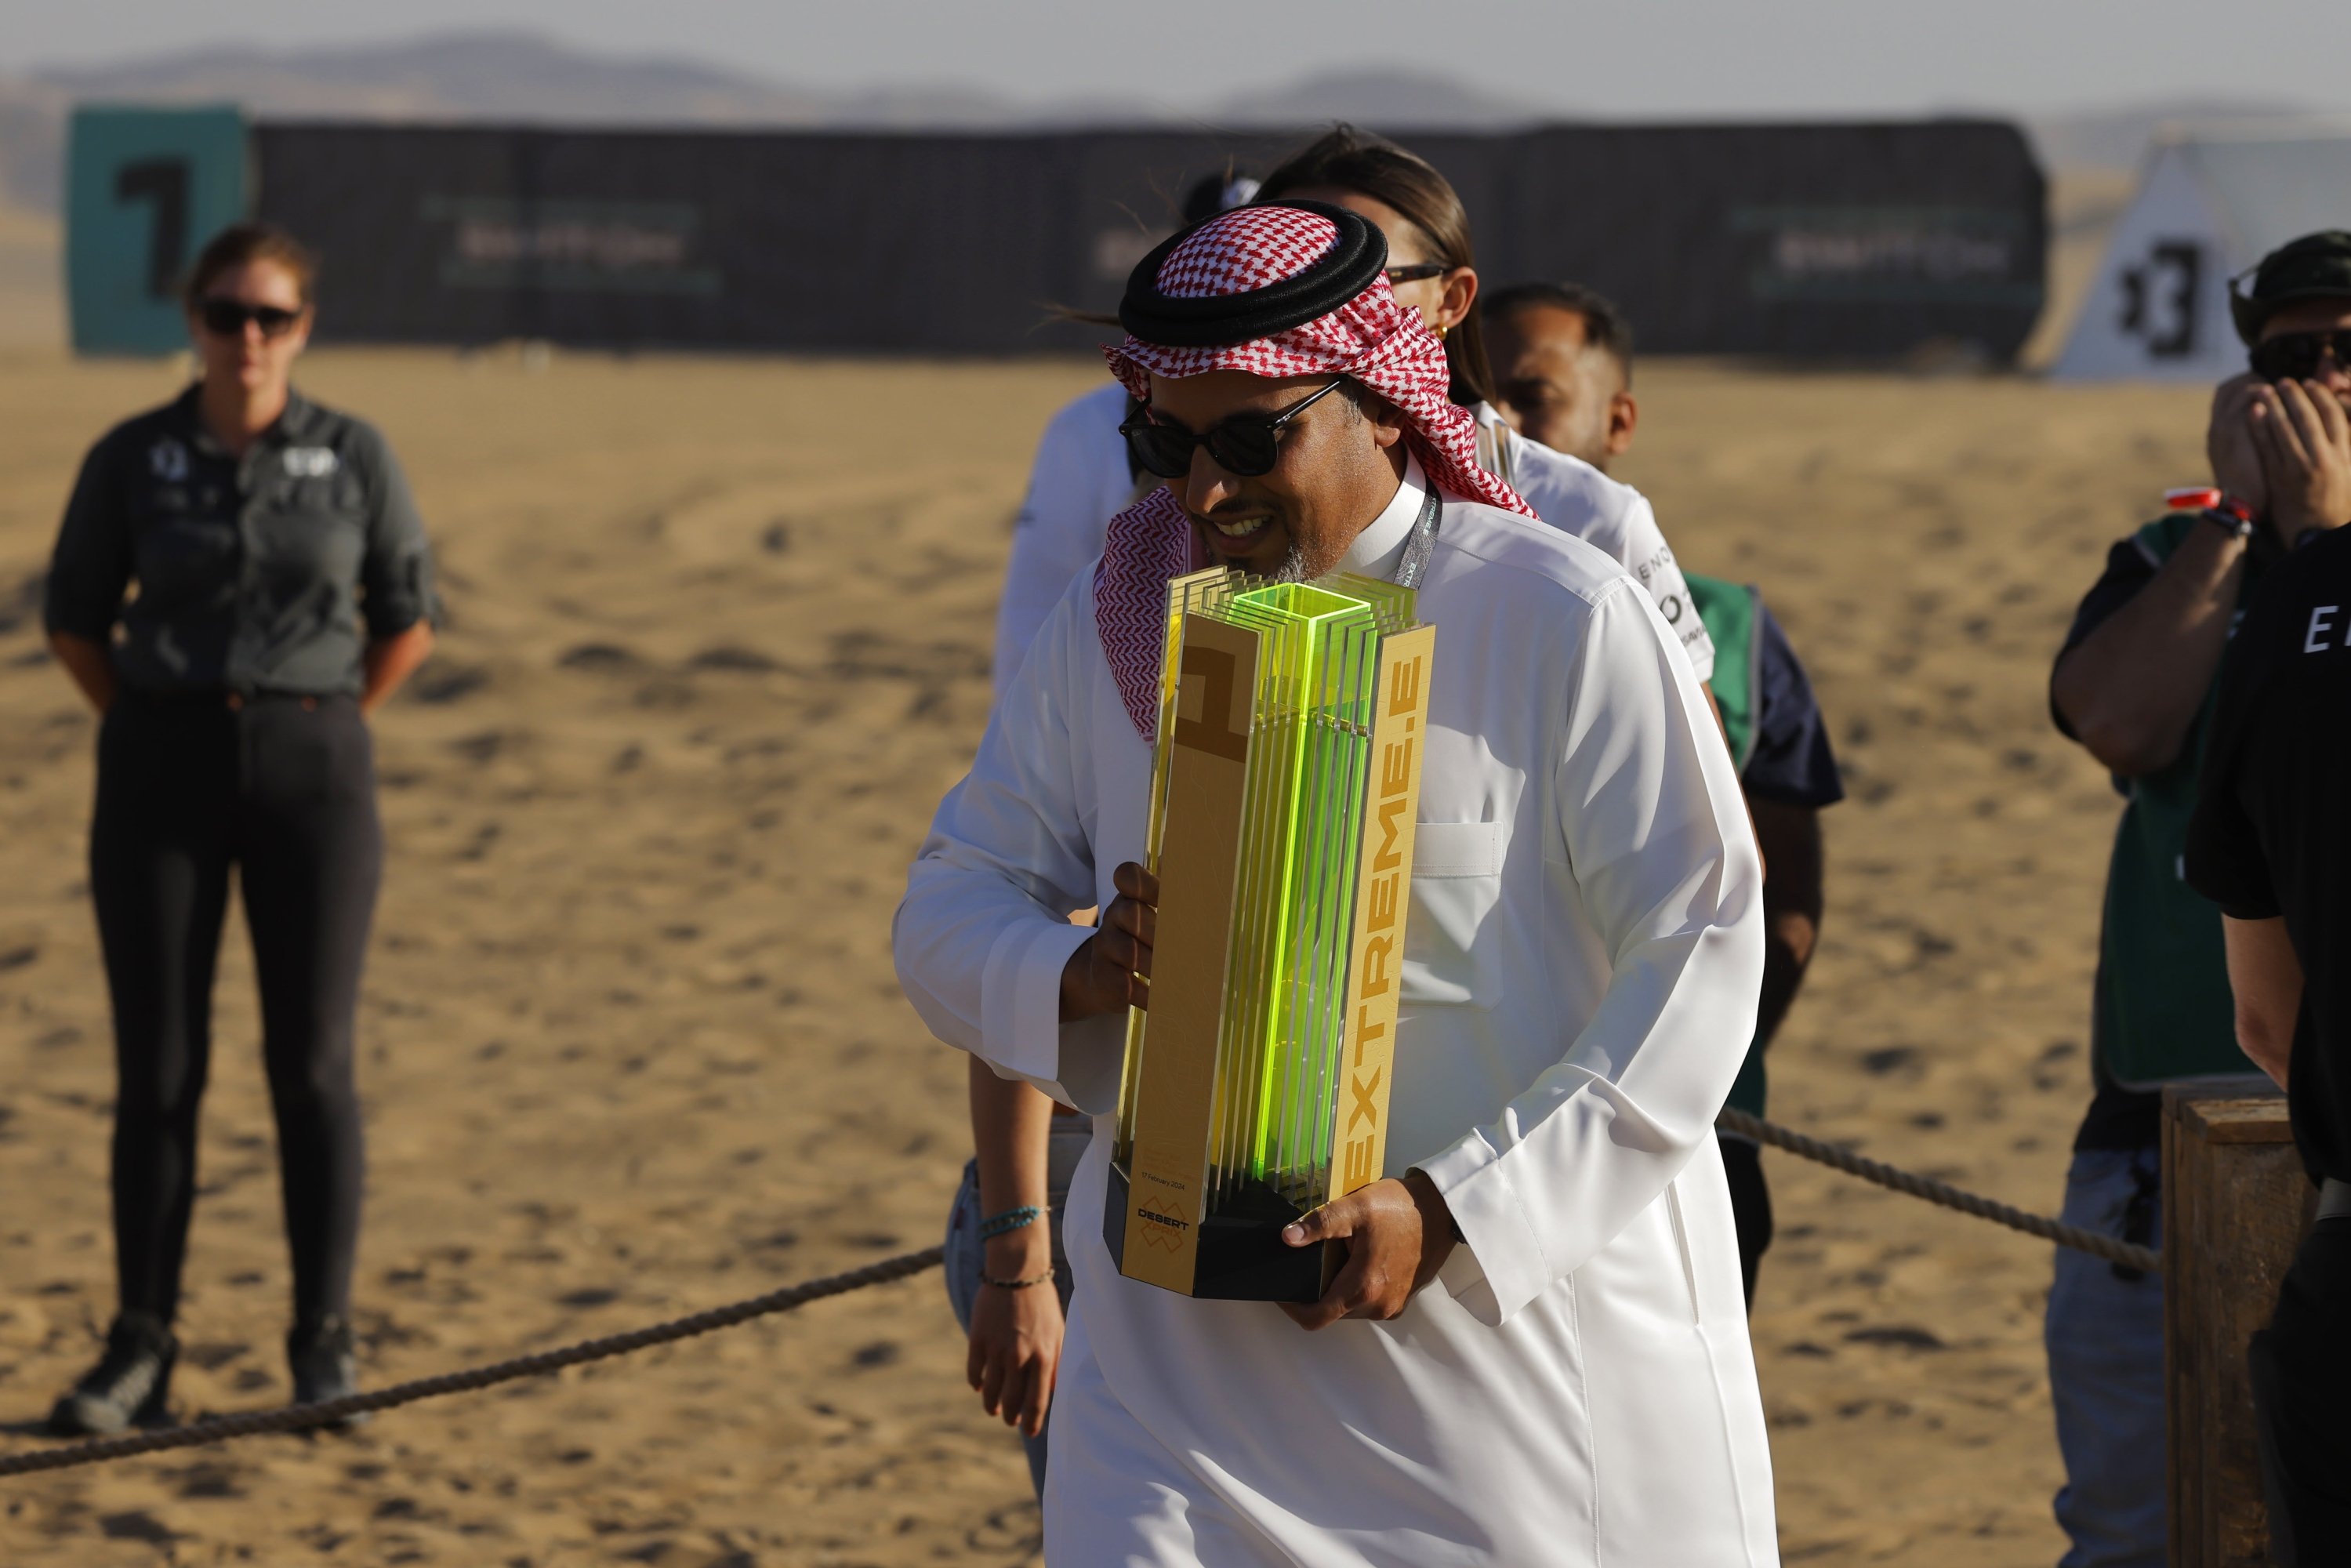 FEBRUARY 17: A local dignitary presents the 1st position trophy during the Saudi Arabia on February 17, 2024. (Photo by Andrew Ferraro / LAT Images)